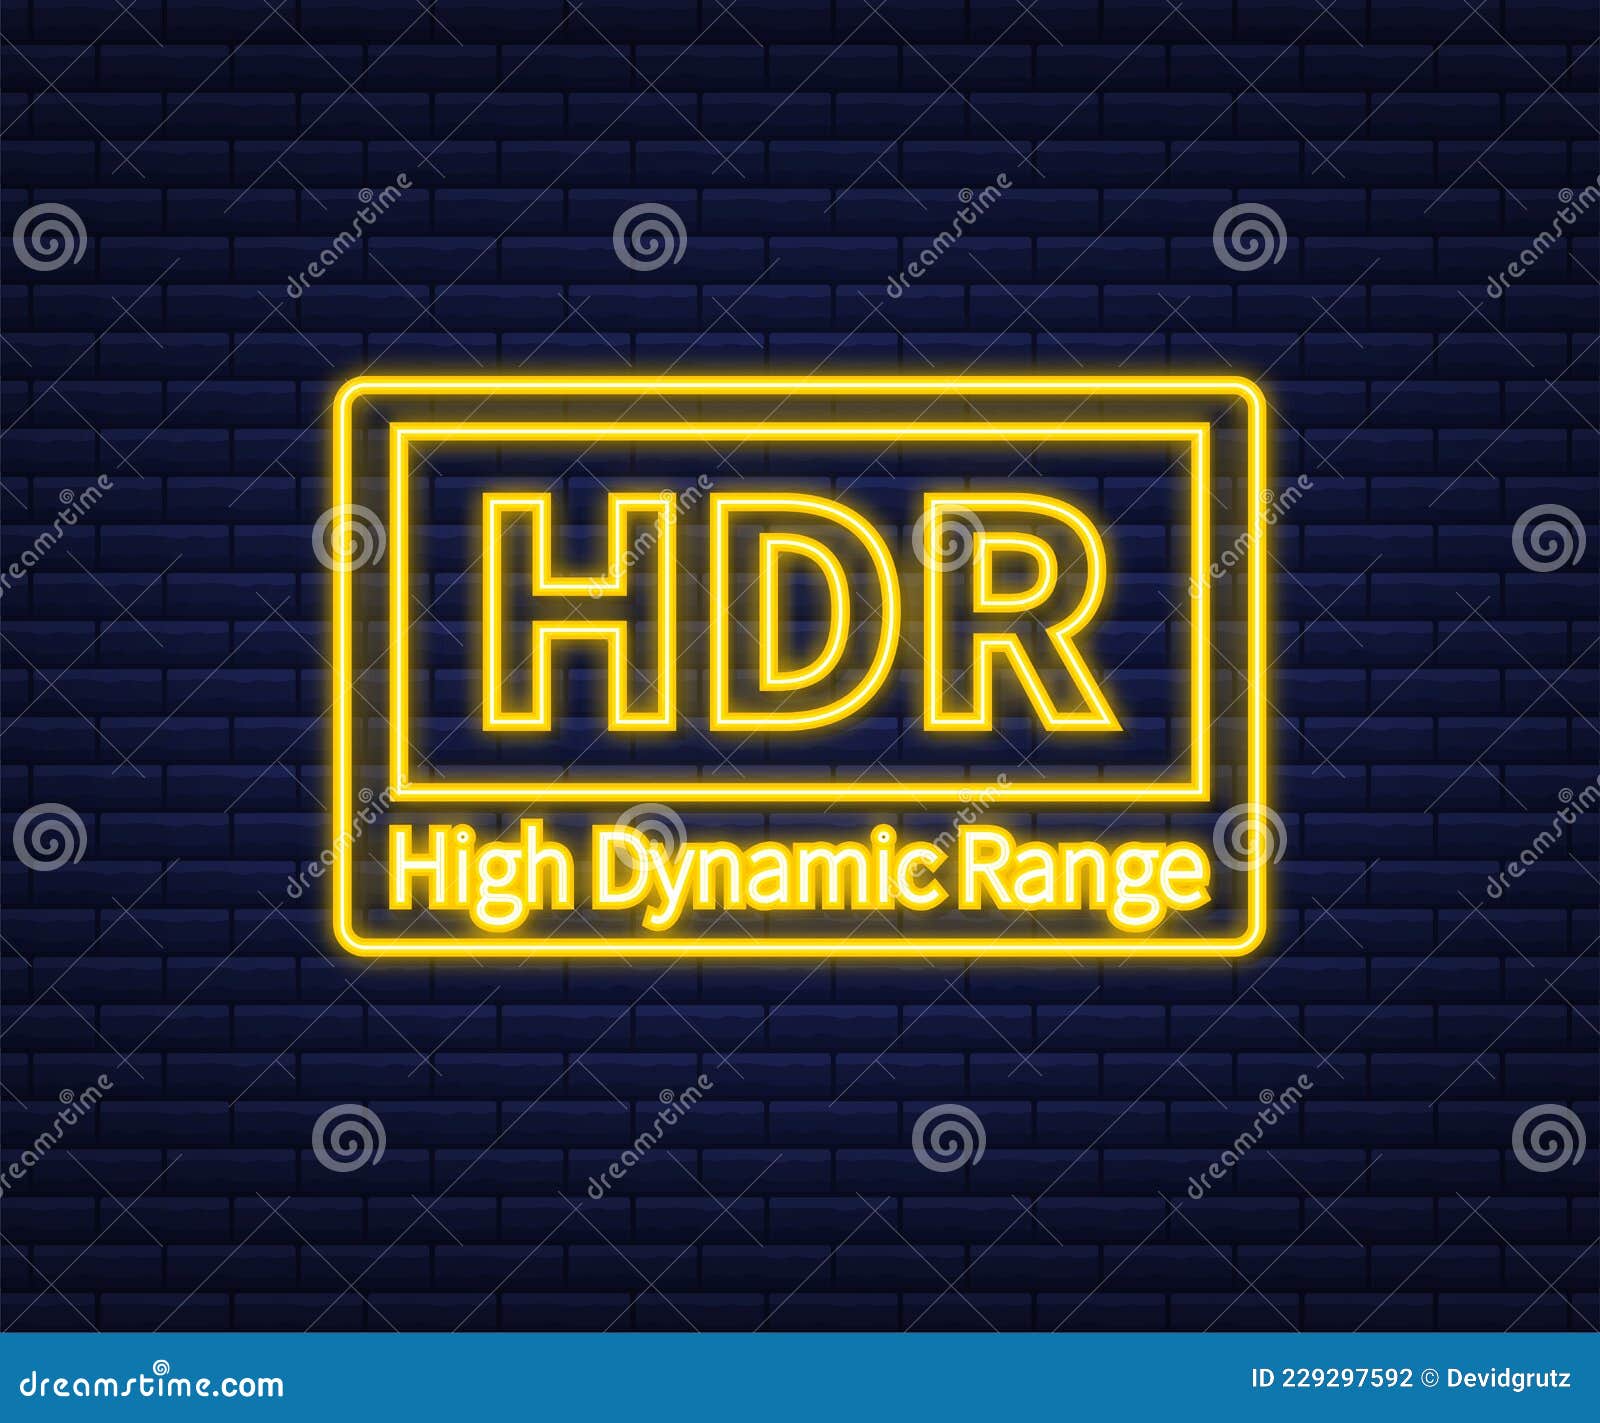 high dynamic range imaging, high definition. hdr. neon icon.  .